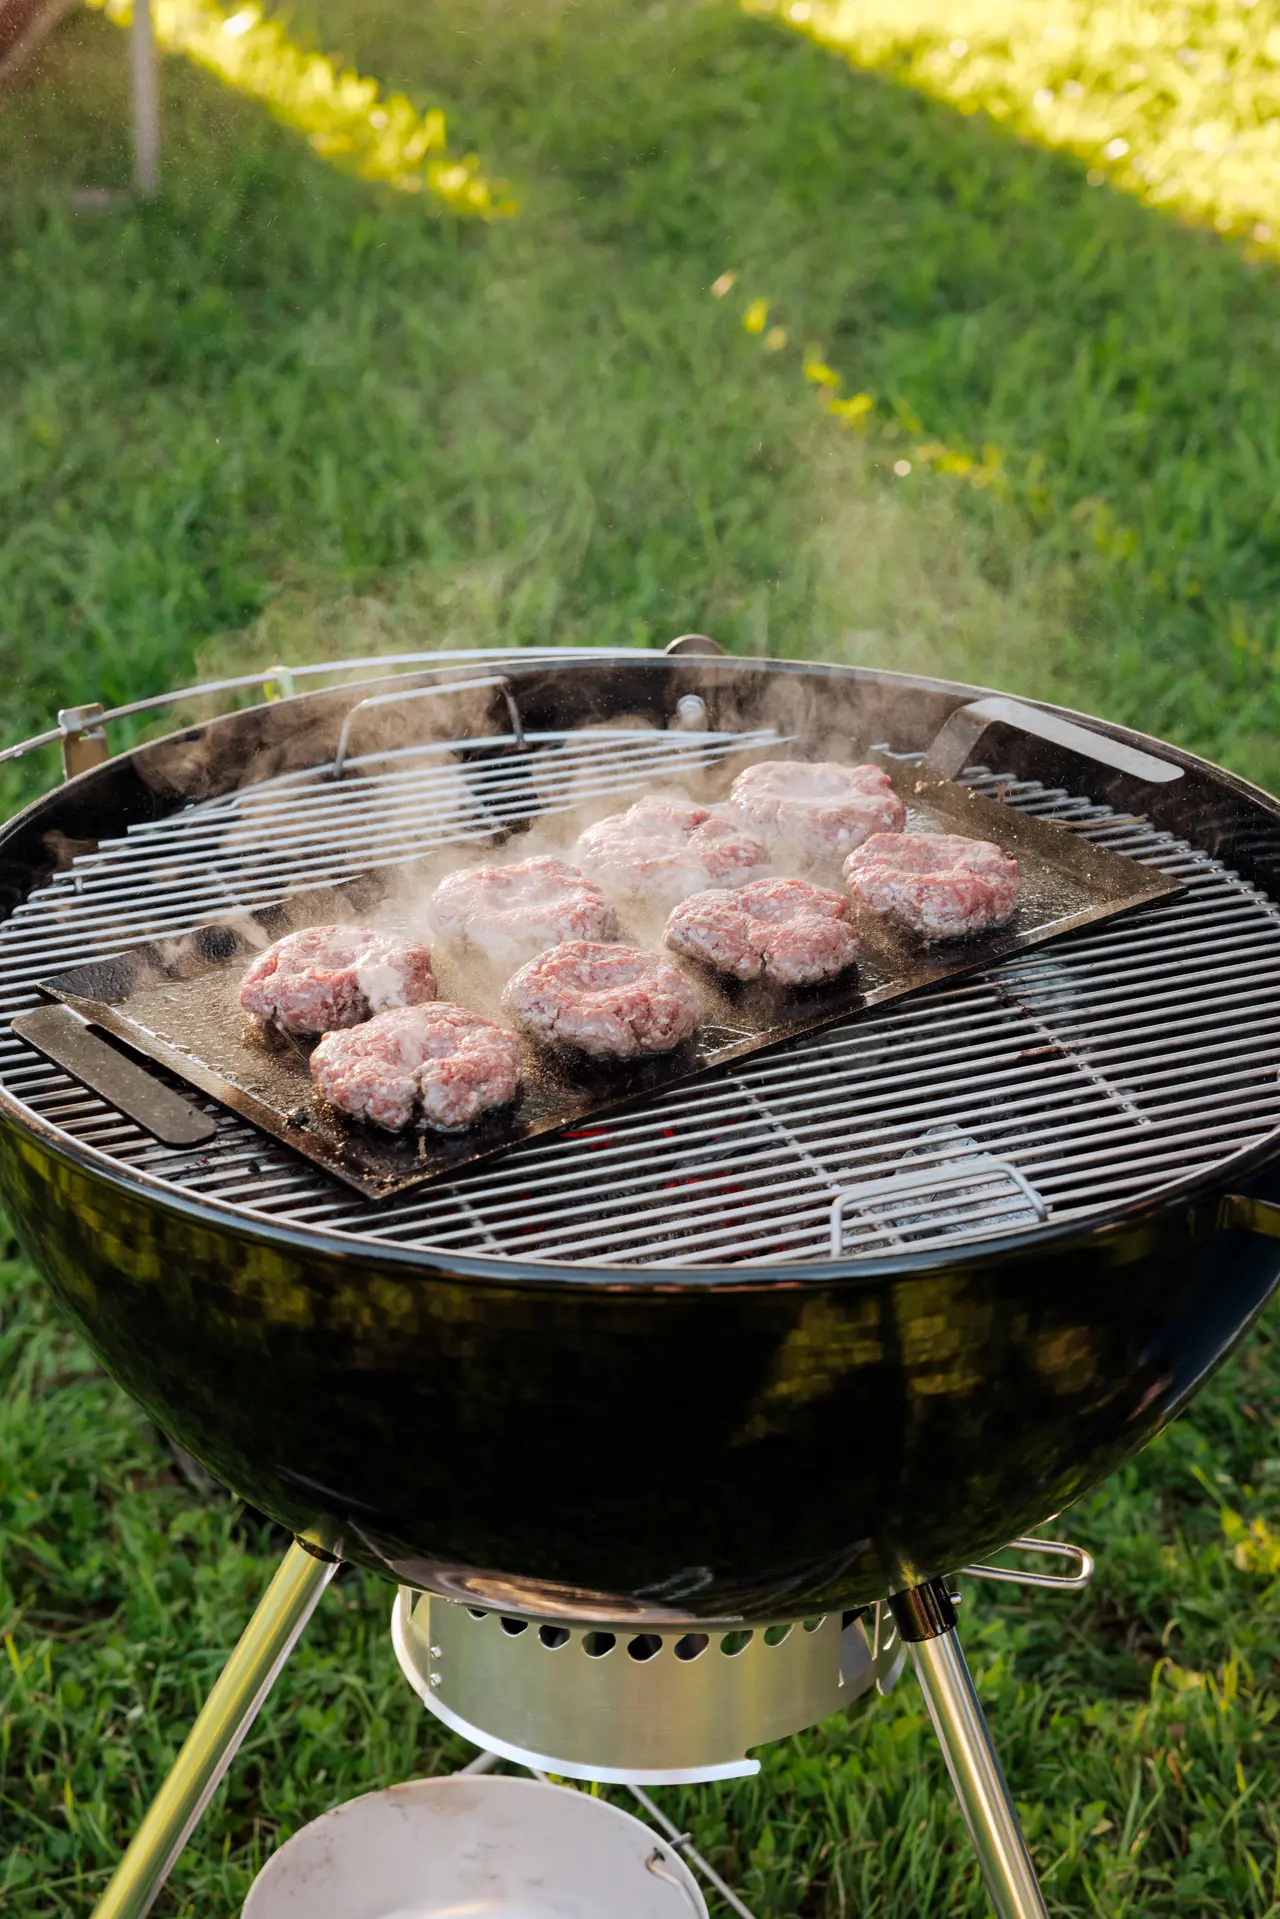 Burgers sizzle on a charcoal grill outdoors, with smoke rising against a green grass background.